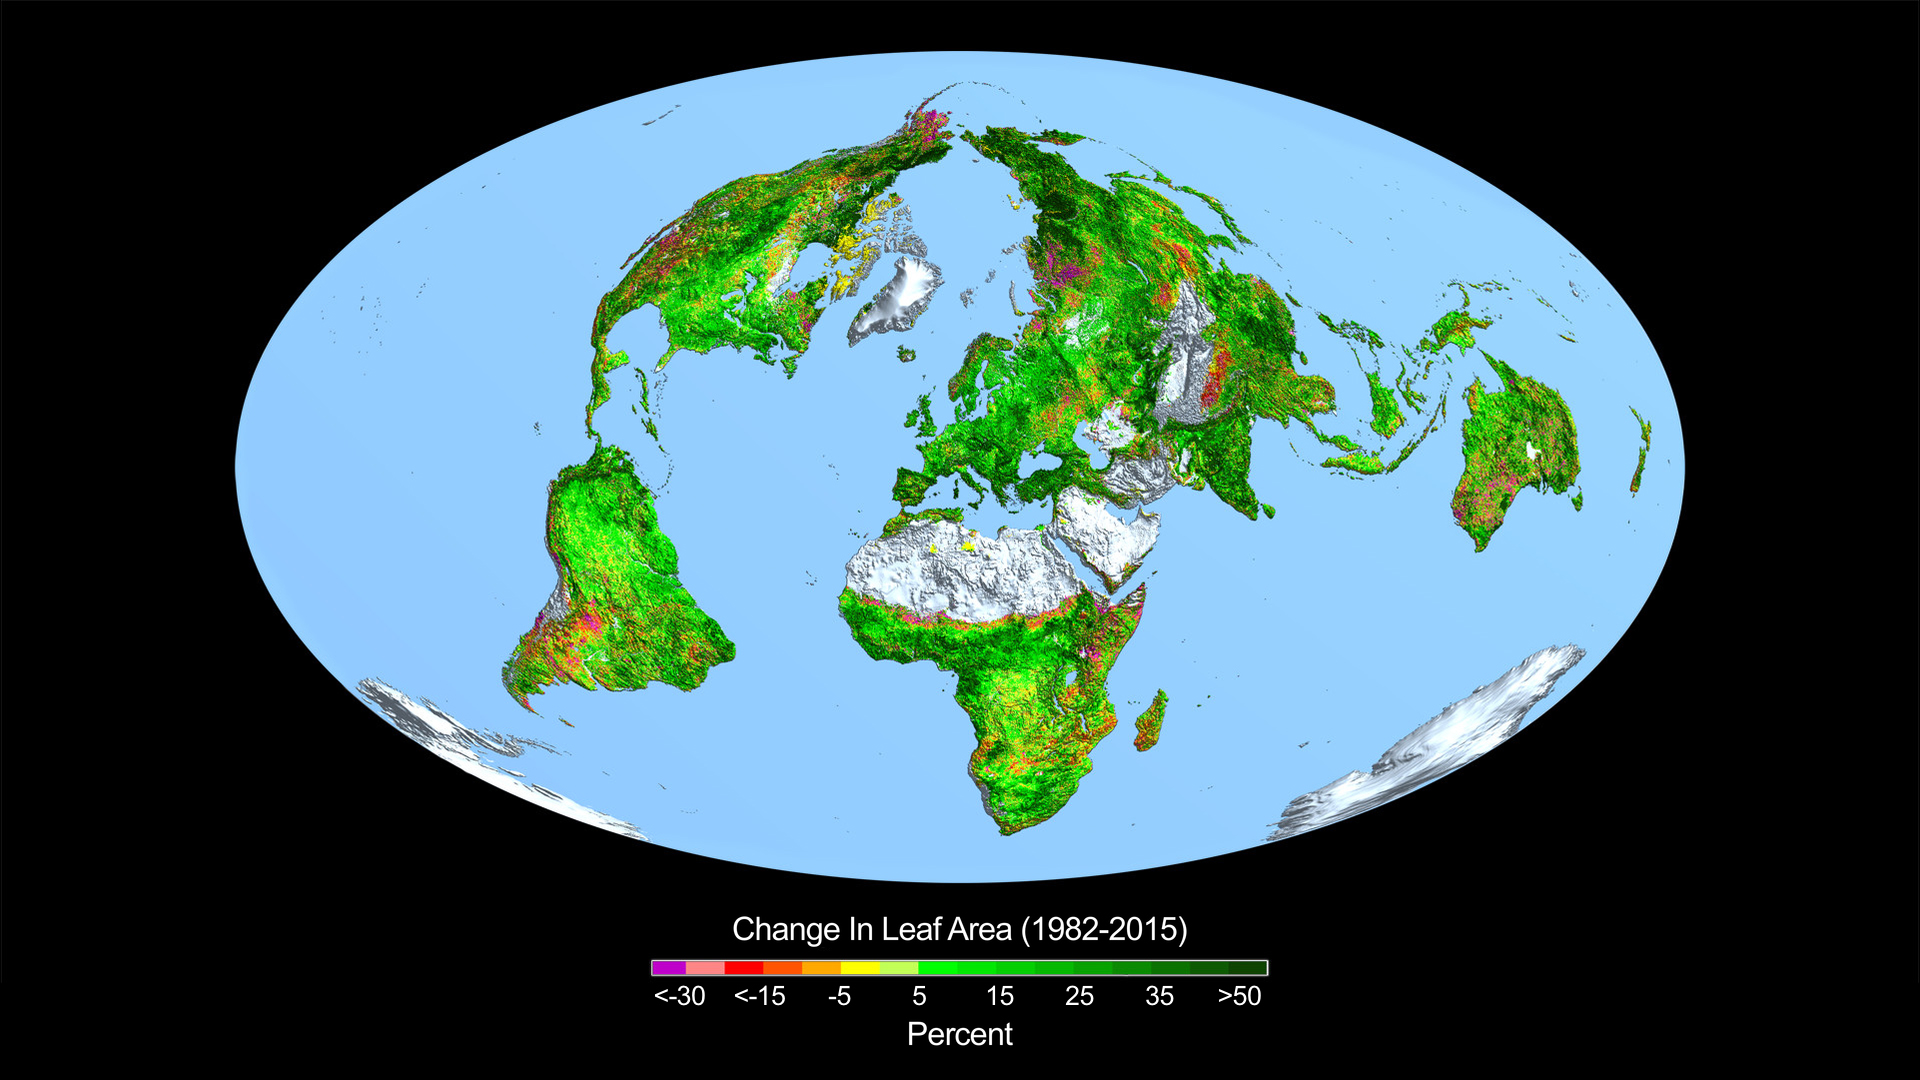 Figure 1. This image shows the change in leaf area across the globe from 1982-2015 detected by satellite. Credits: Boston University/R. Myneni. Image source: NASA